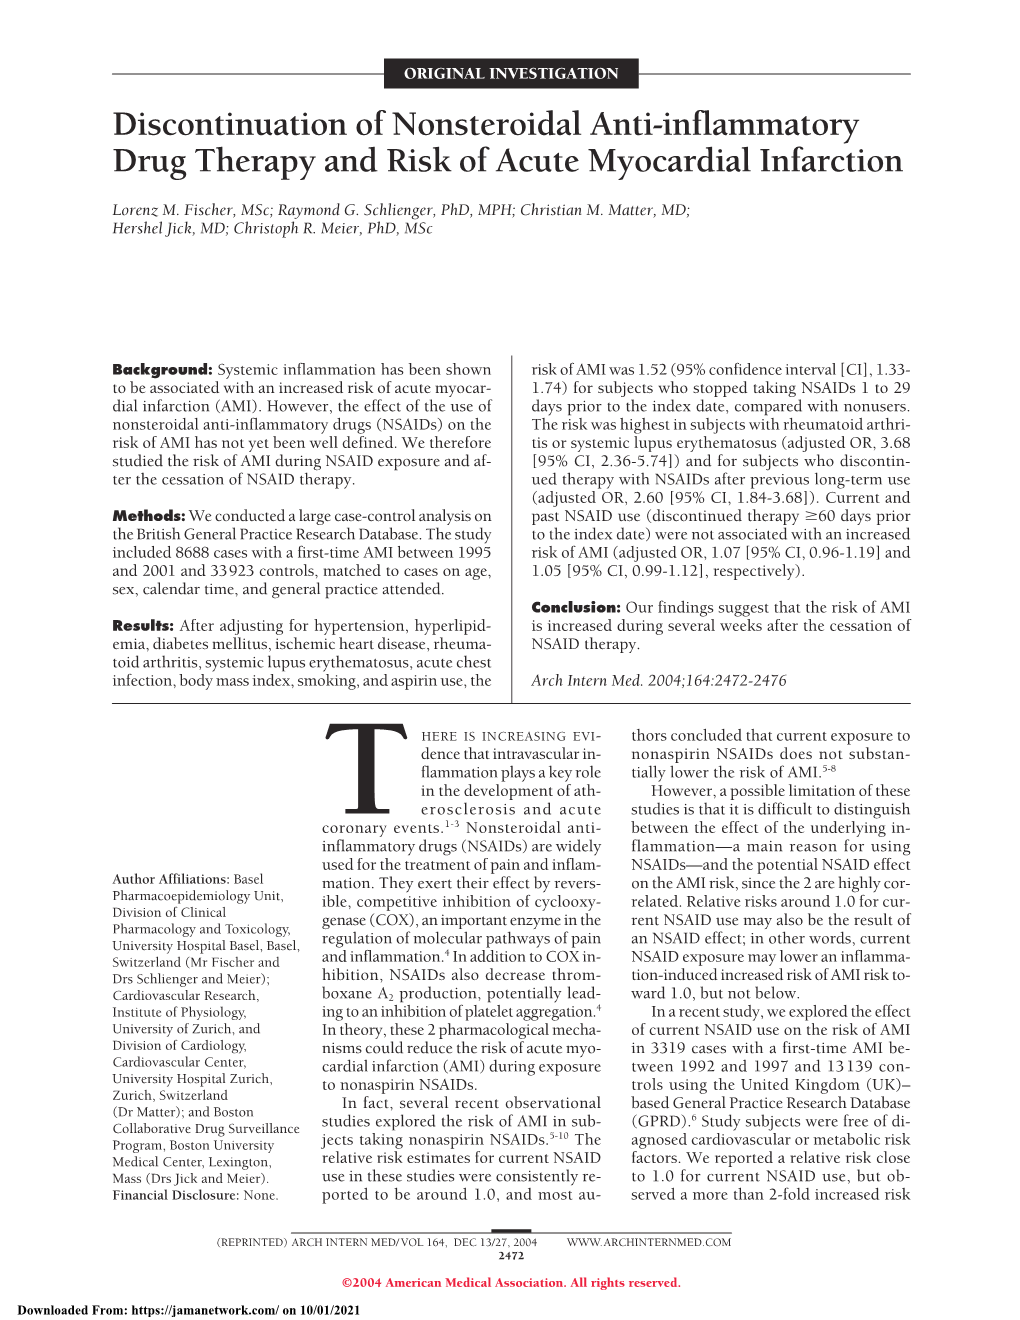 Discontinuation of Nonsteroidal Anti-Inflammatory Drug Therapy and Risk of Acute Myocardial Infarction